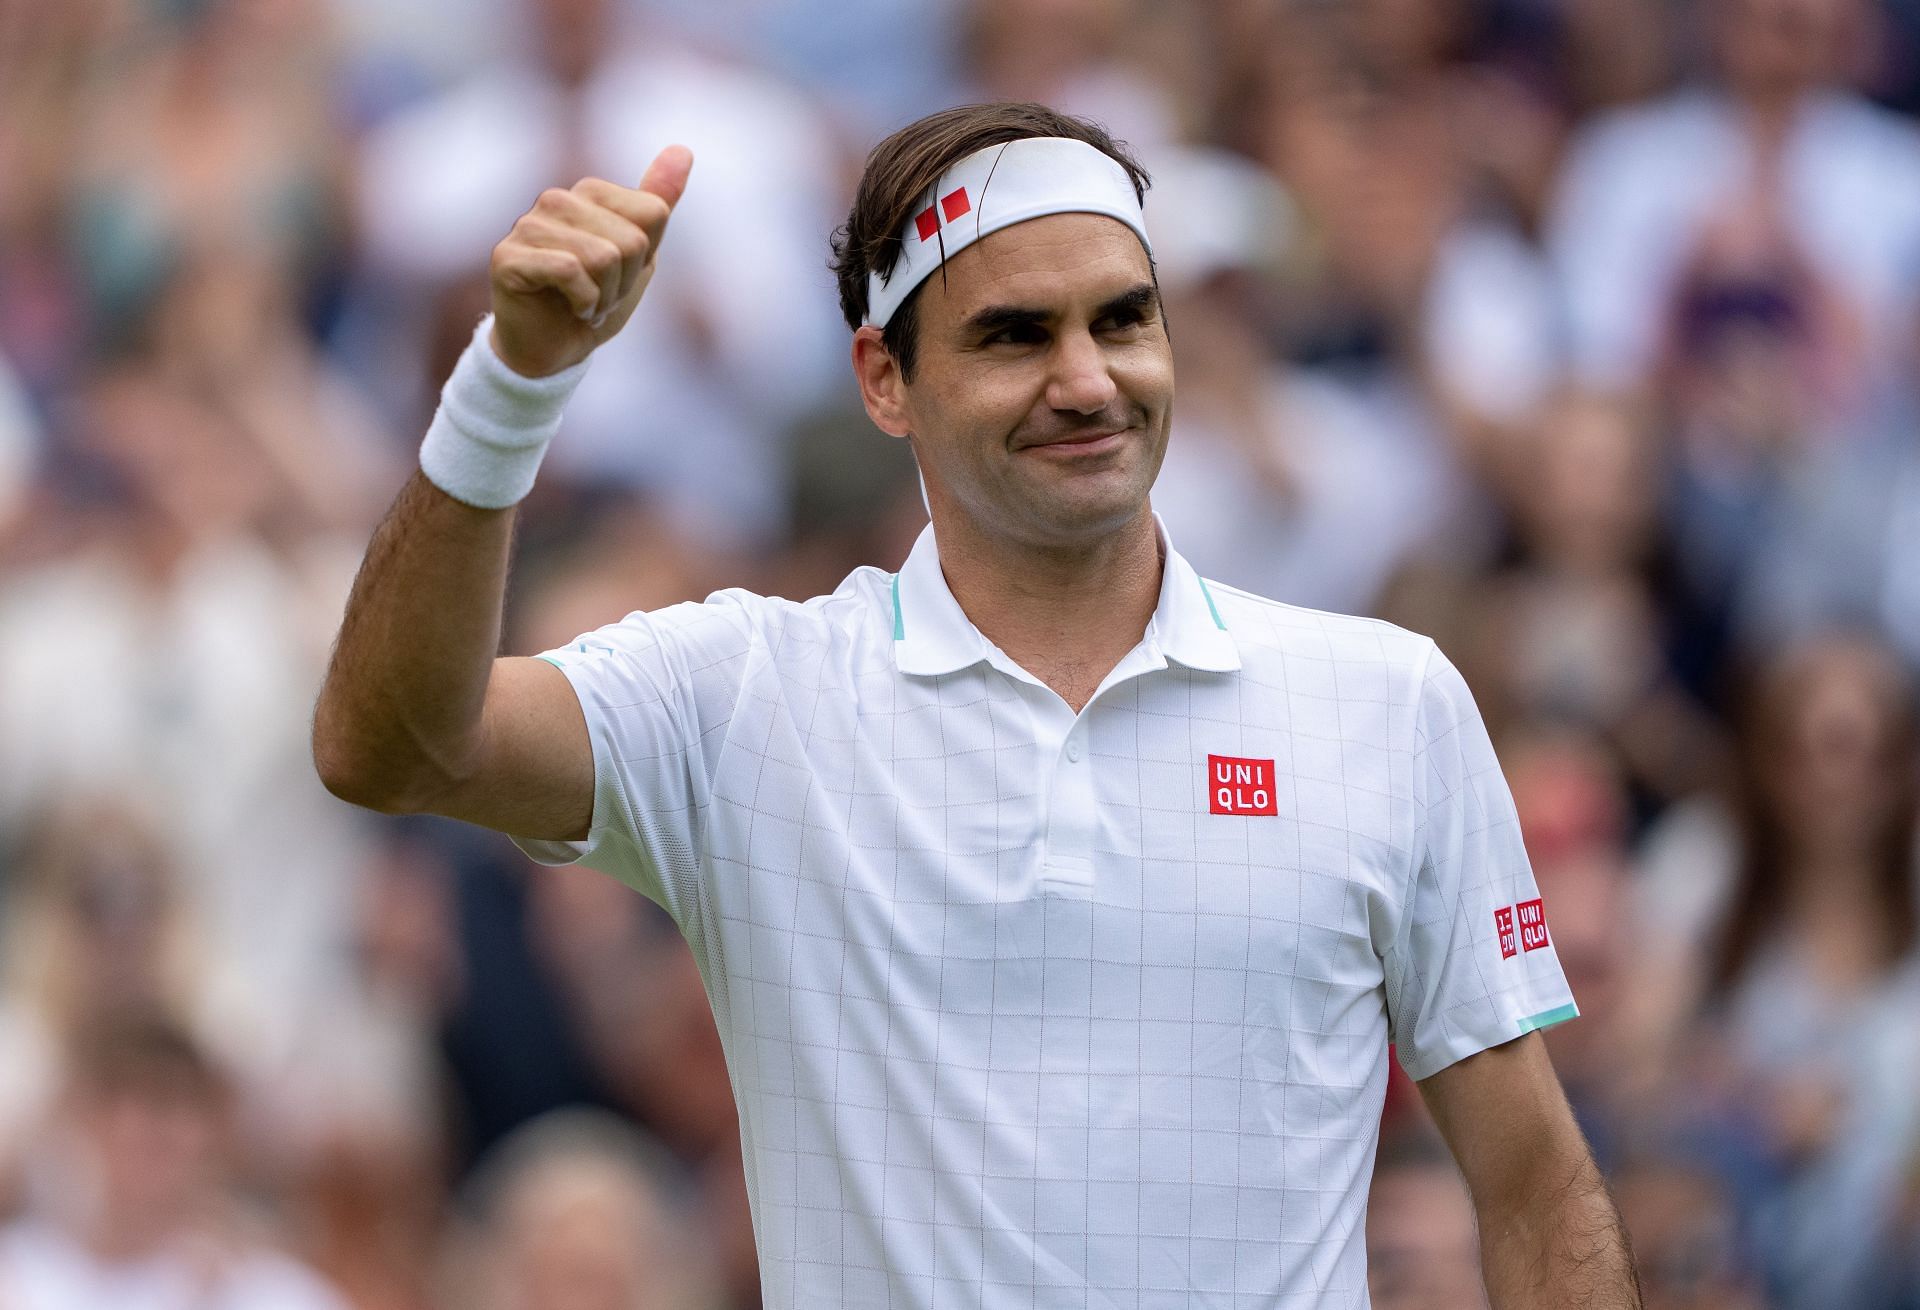 Roger Federer continues his run as the highest-paid tennis player in the world